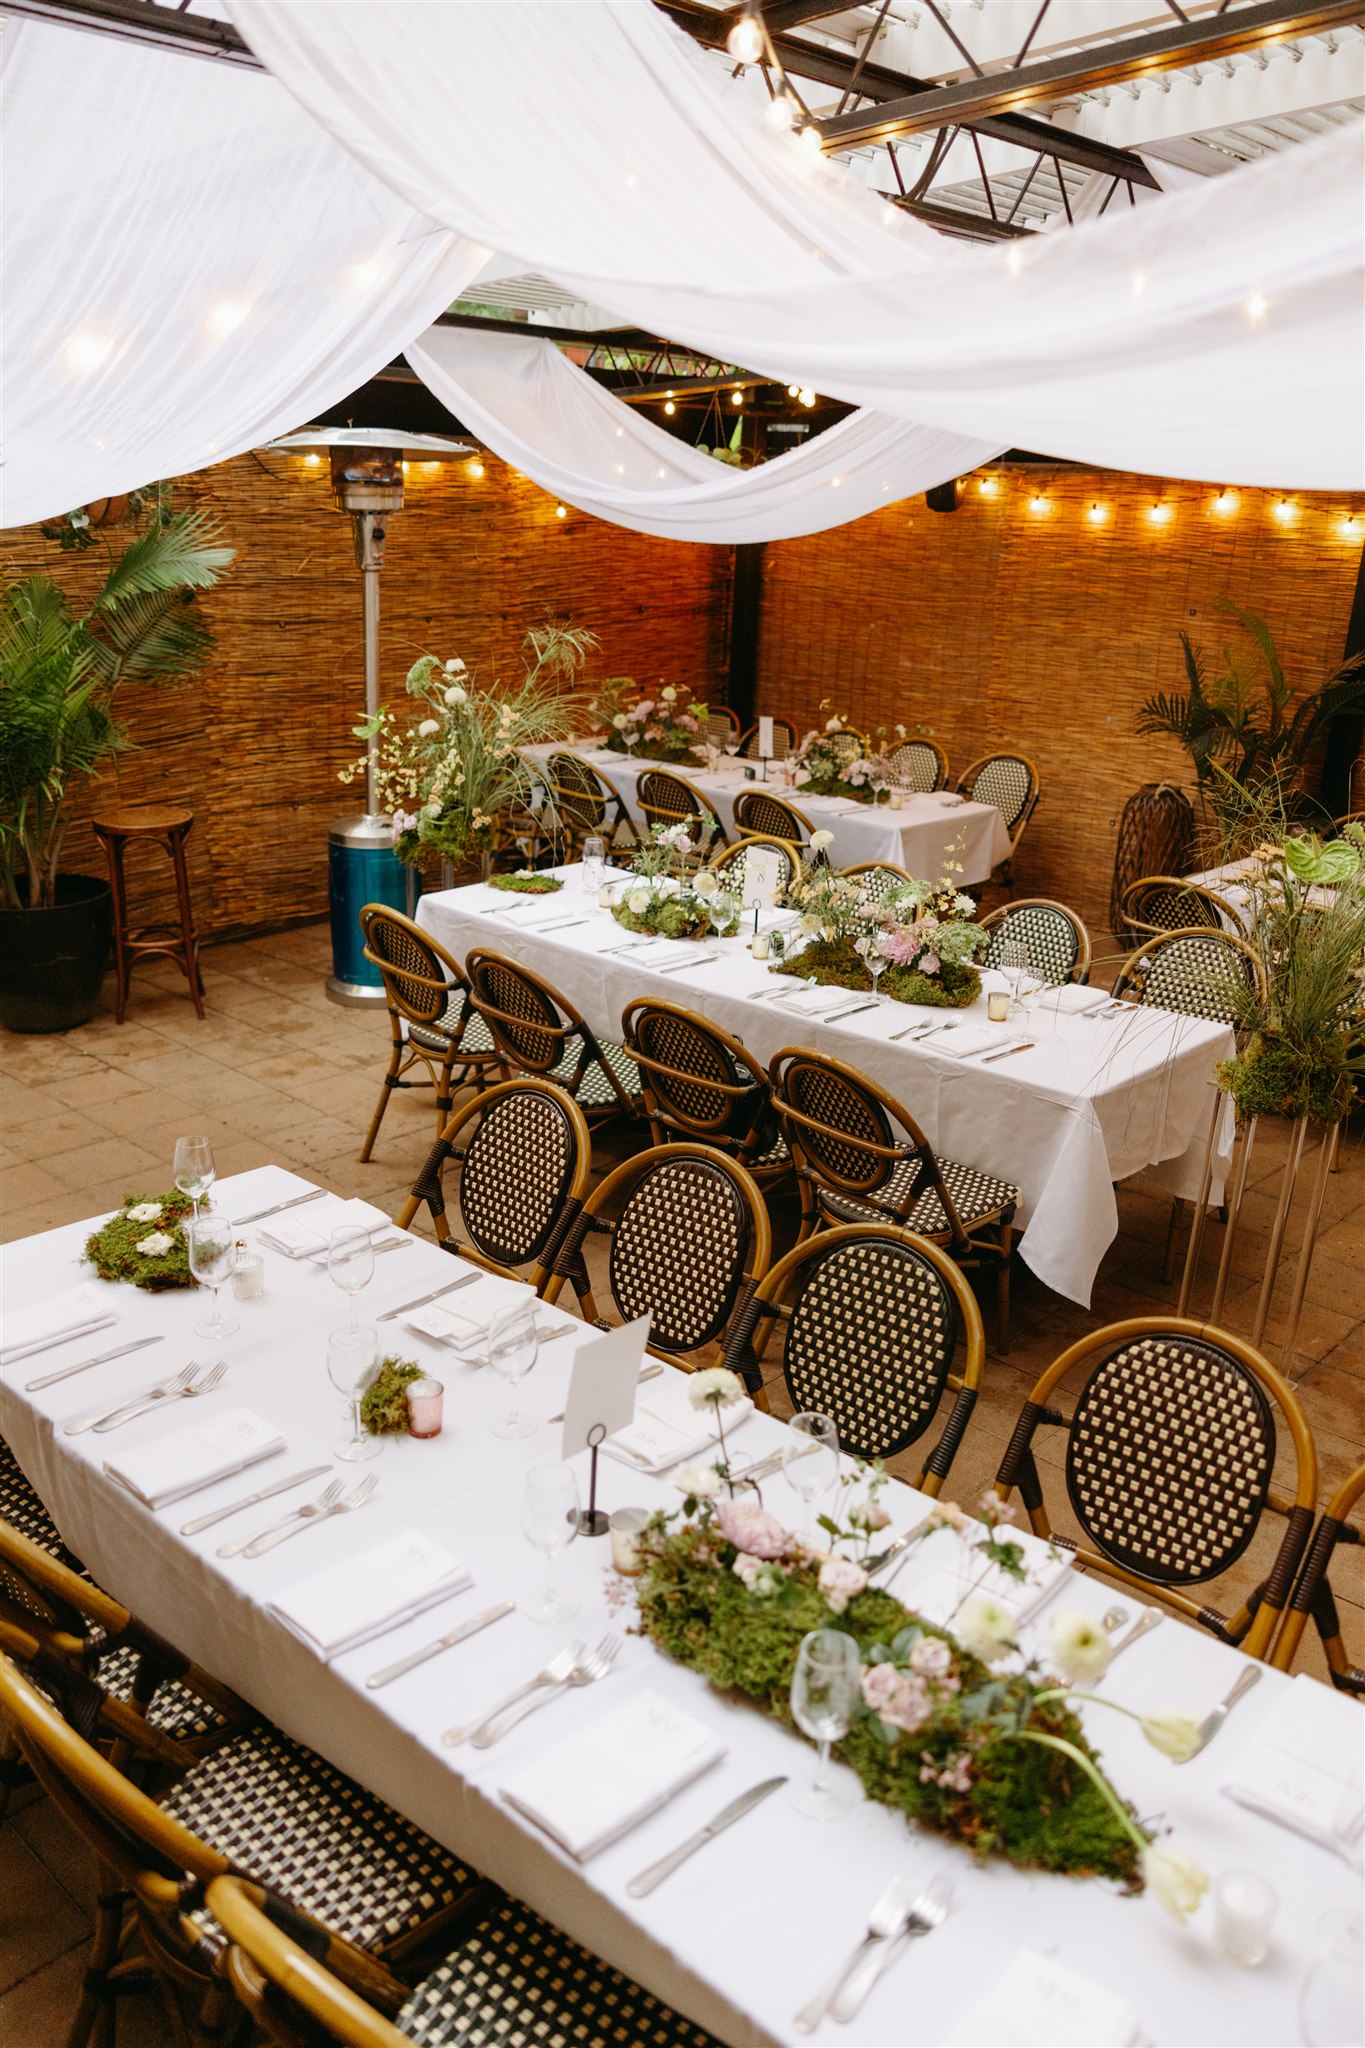 Outdoor dining area with wicker chairs and tables set with white tablecloths and floral centerpieces under string lights at an intimate restaurant wedding